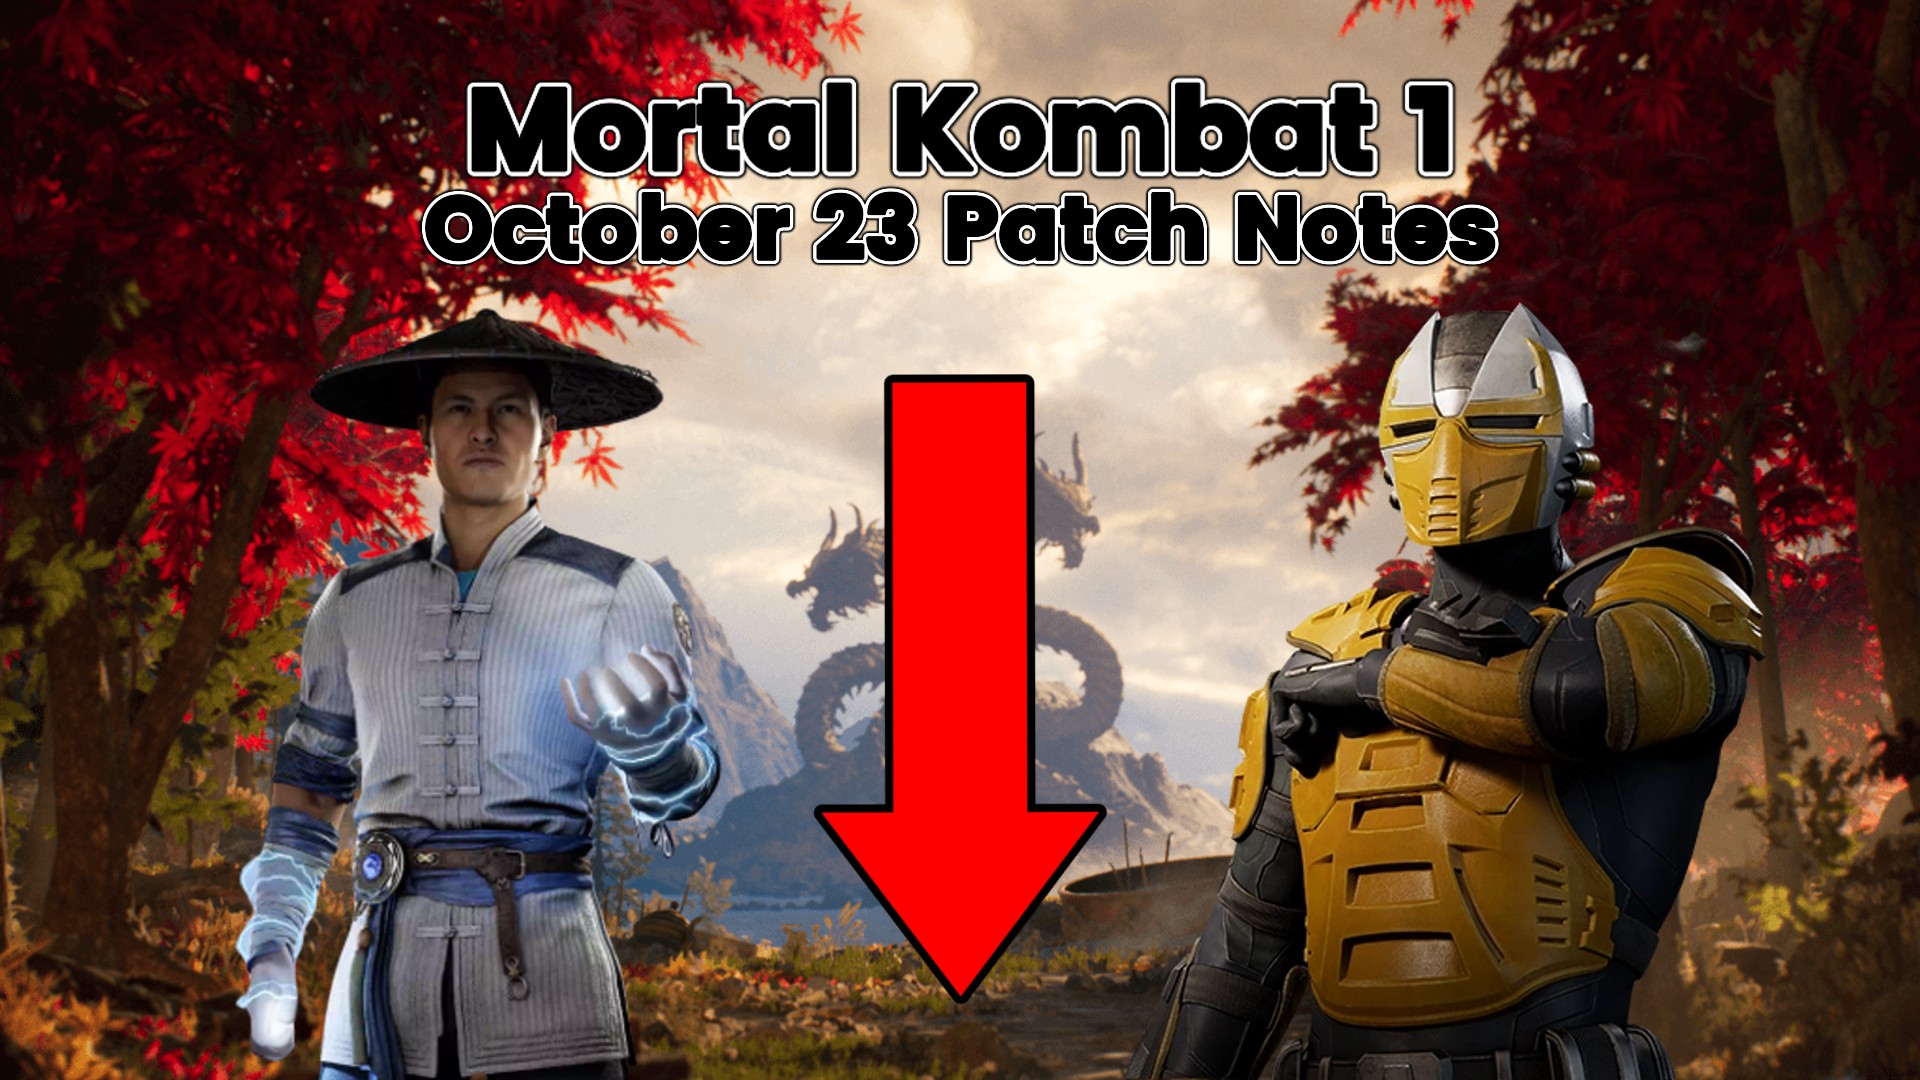 Mortal Kombat 1 24th Character: Who is the Missing Fighter in the